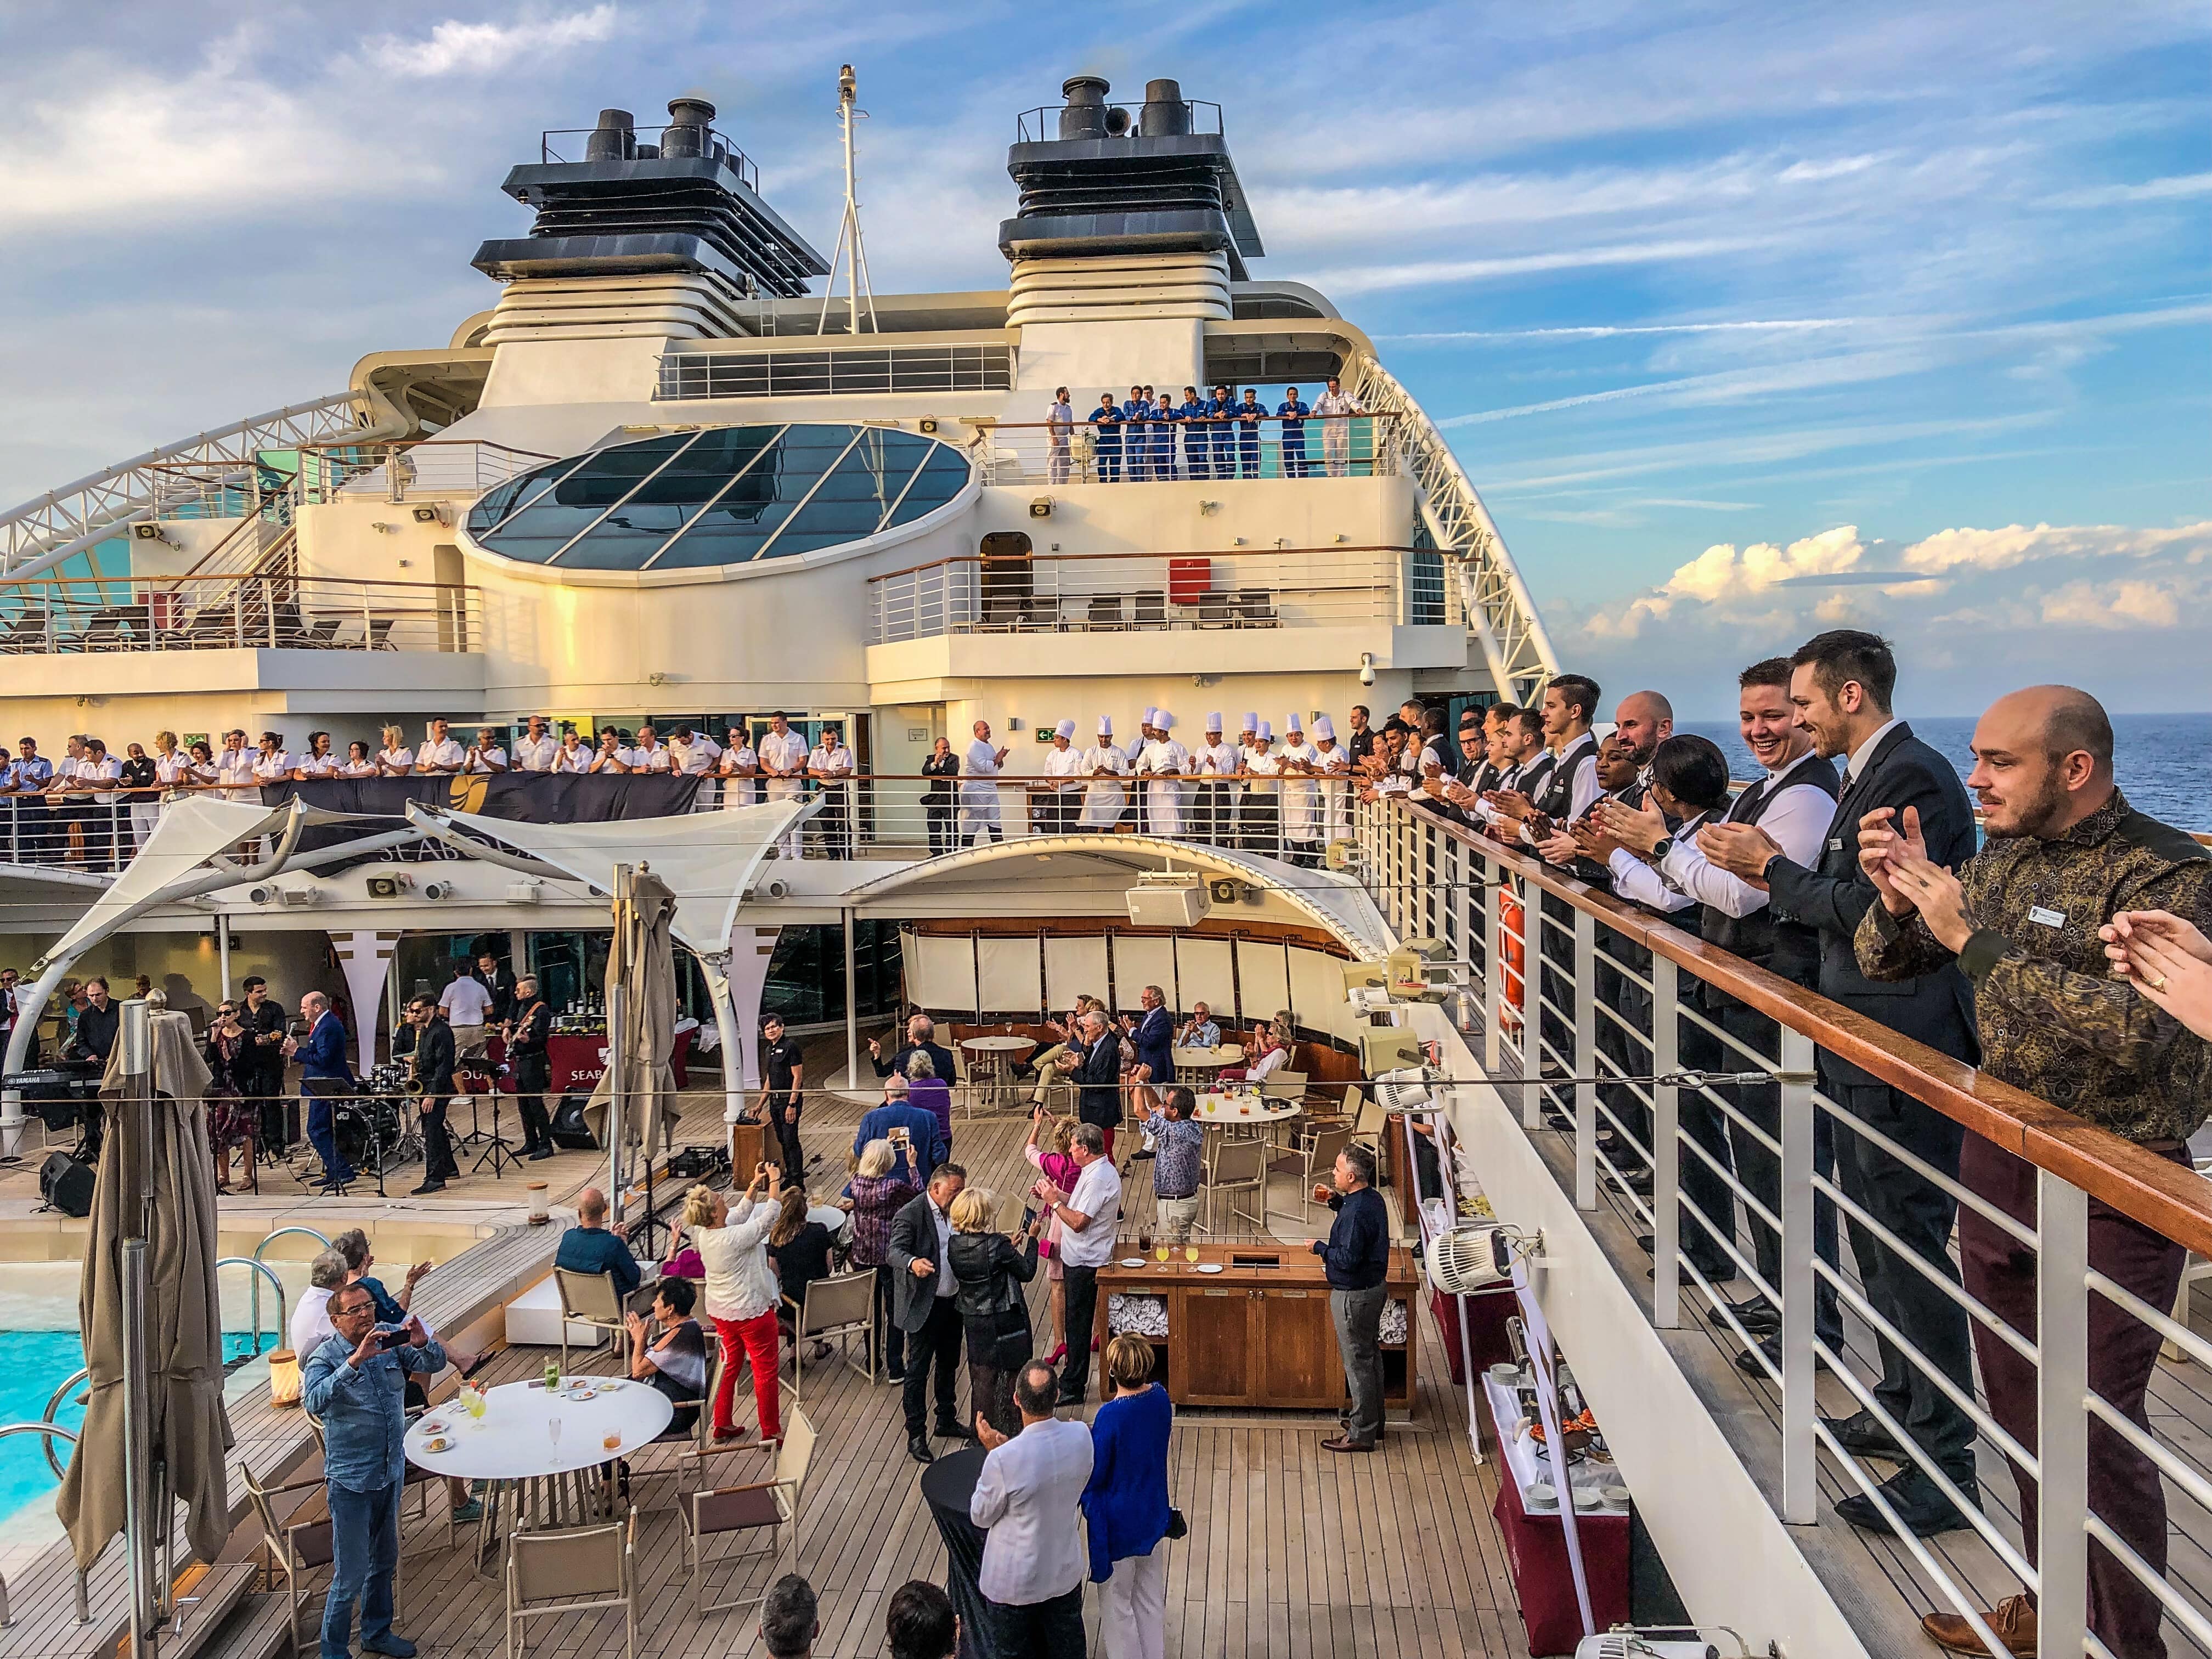 Seabourn Cruises Encore. Seabourn Cruises need-to-knows https://www.tipsfortravellers.com/seabourn-cruises-tips-things-you-need-to-know-before-cruising/